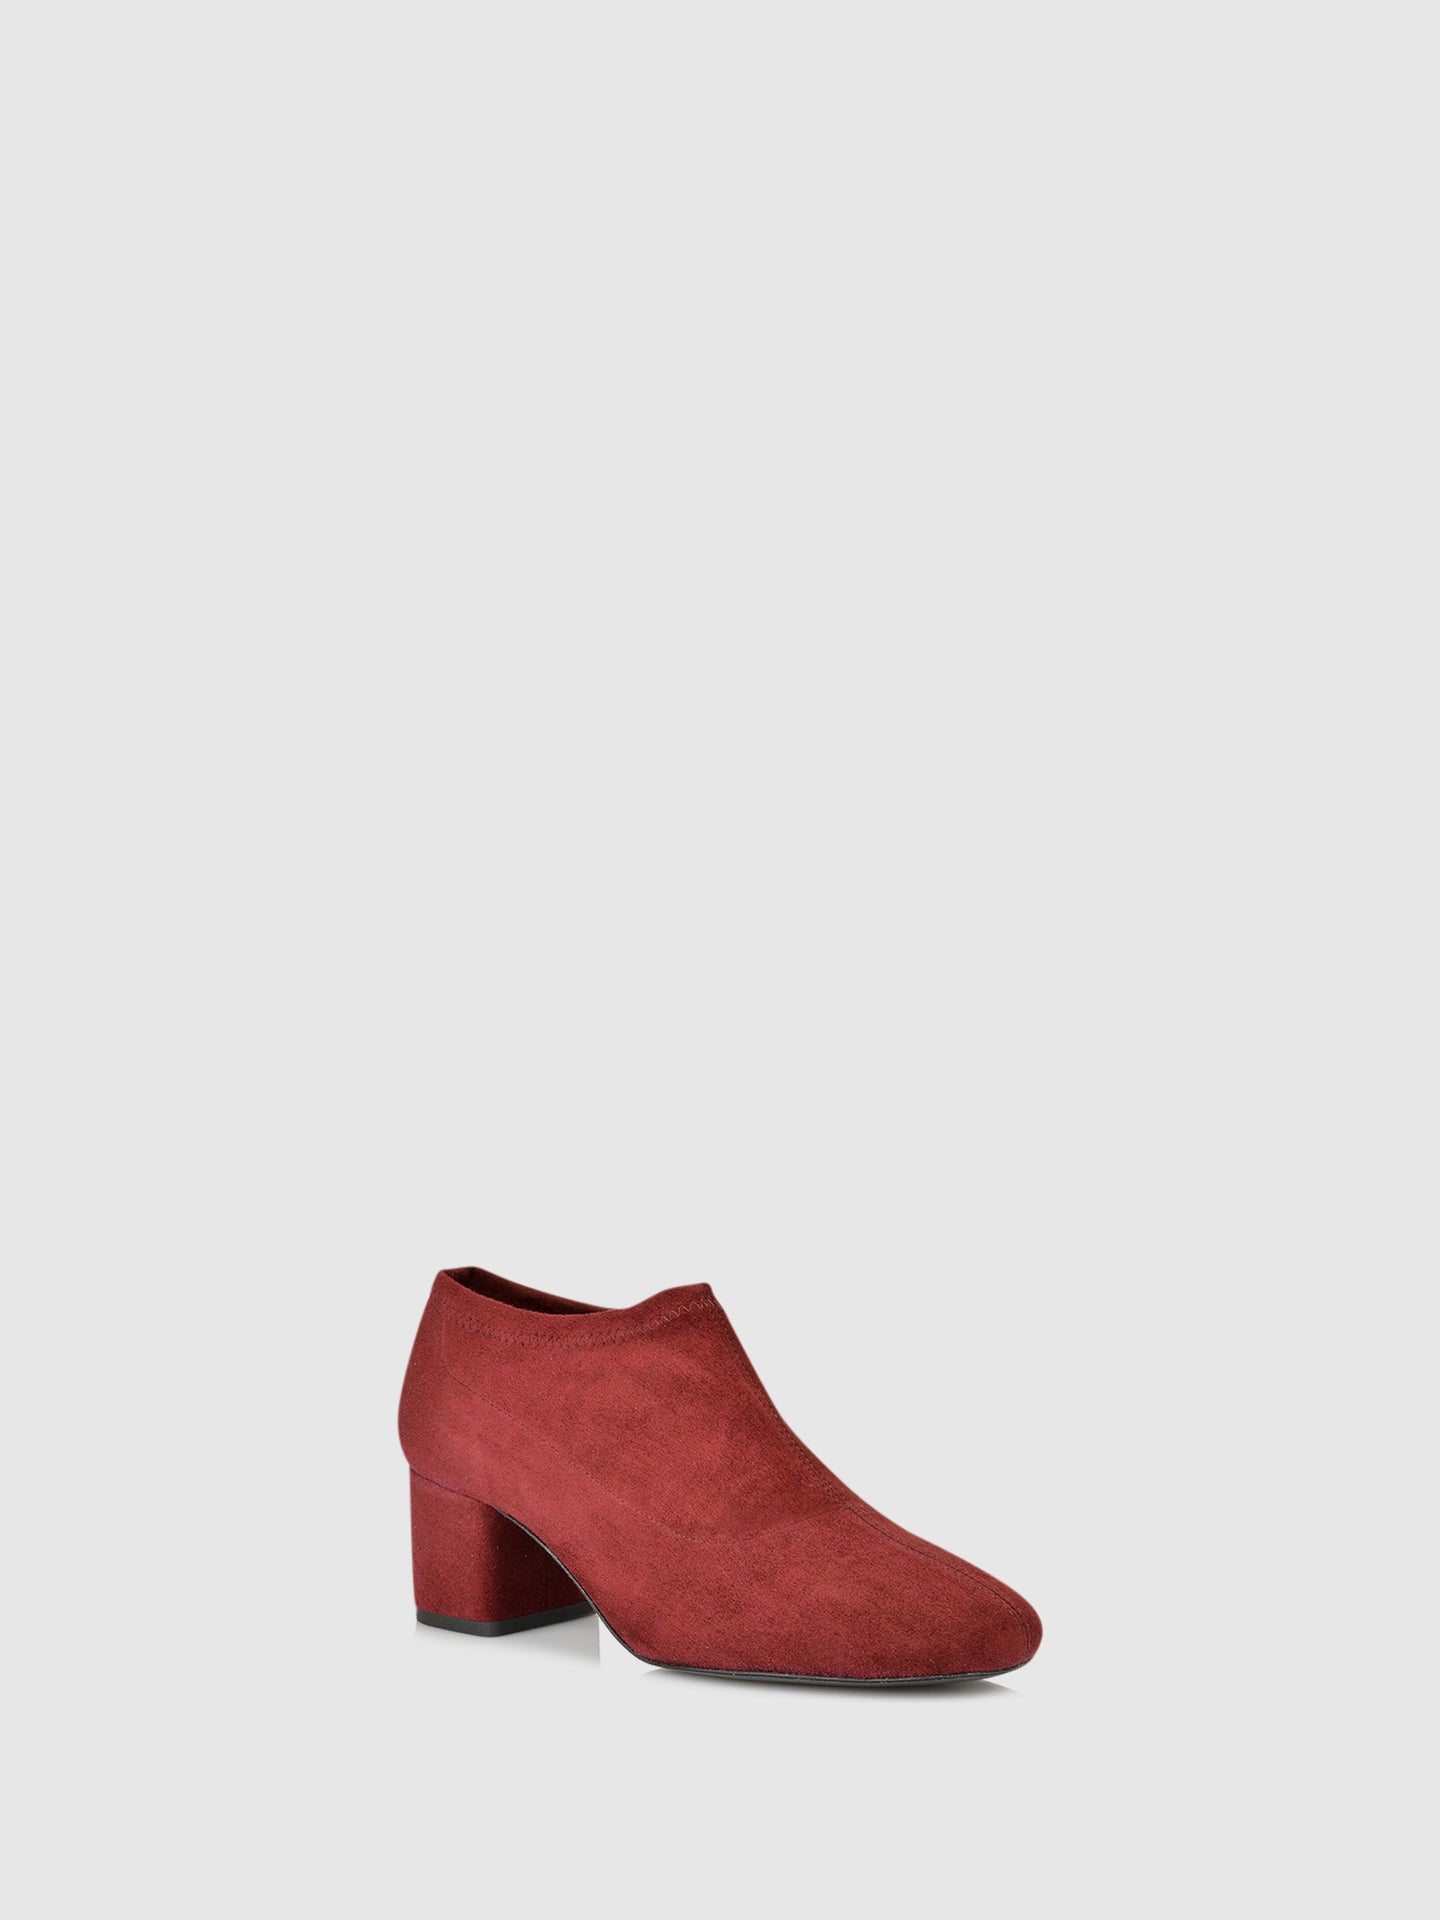 JJ Heitor Red Pointed Toe Ankle Boots